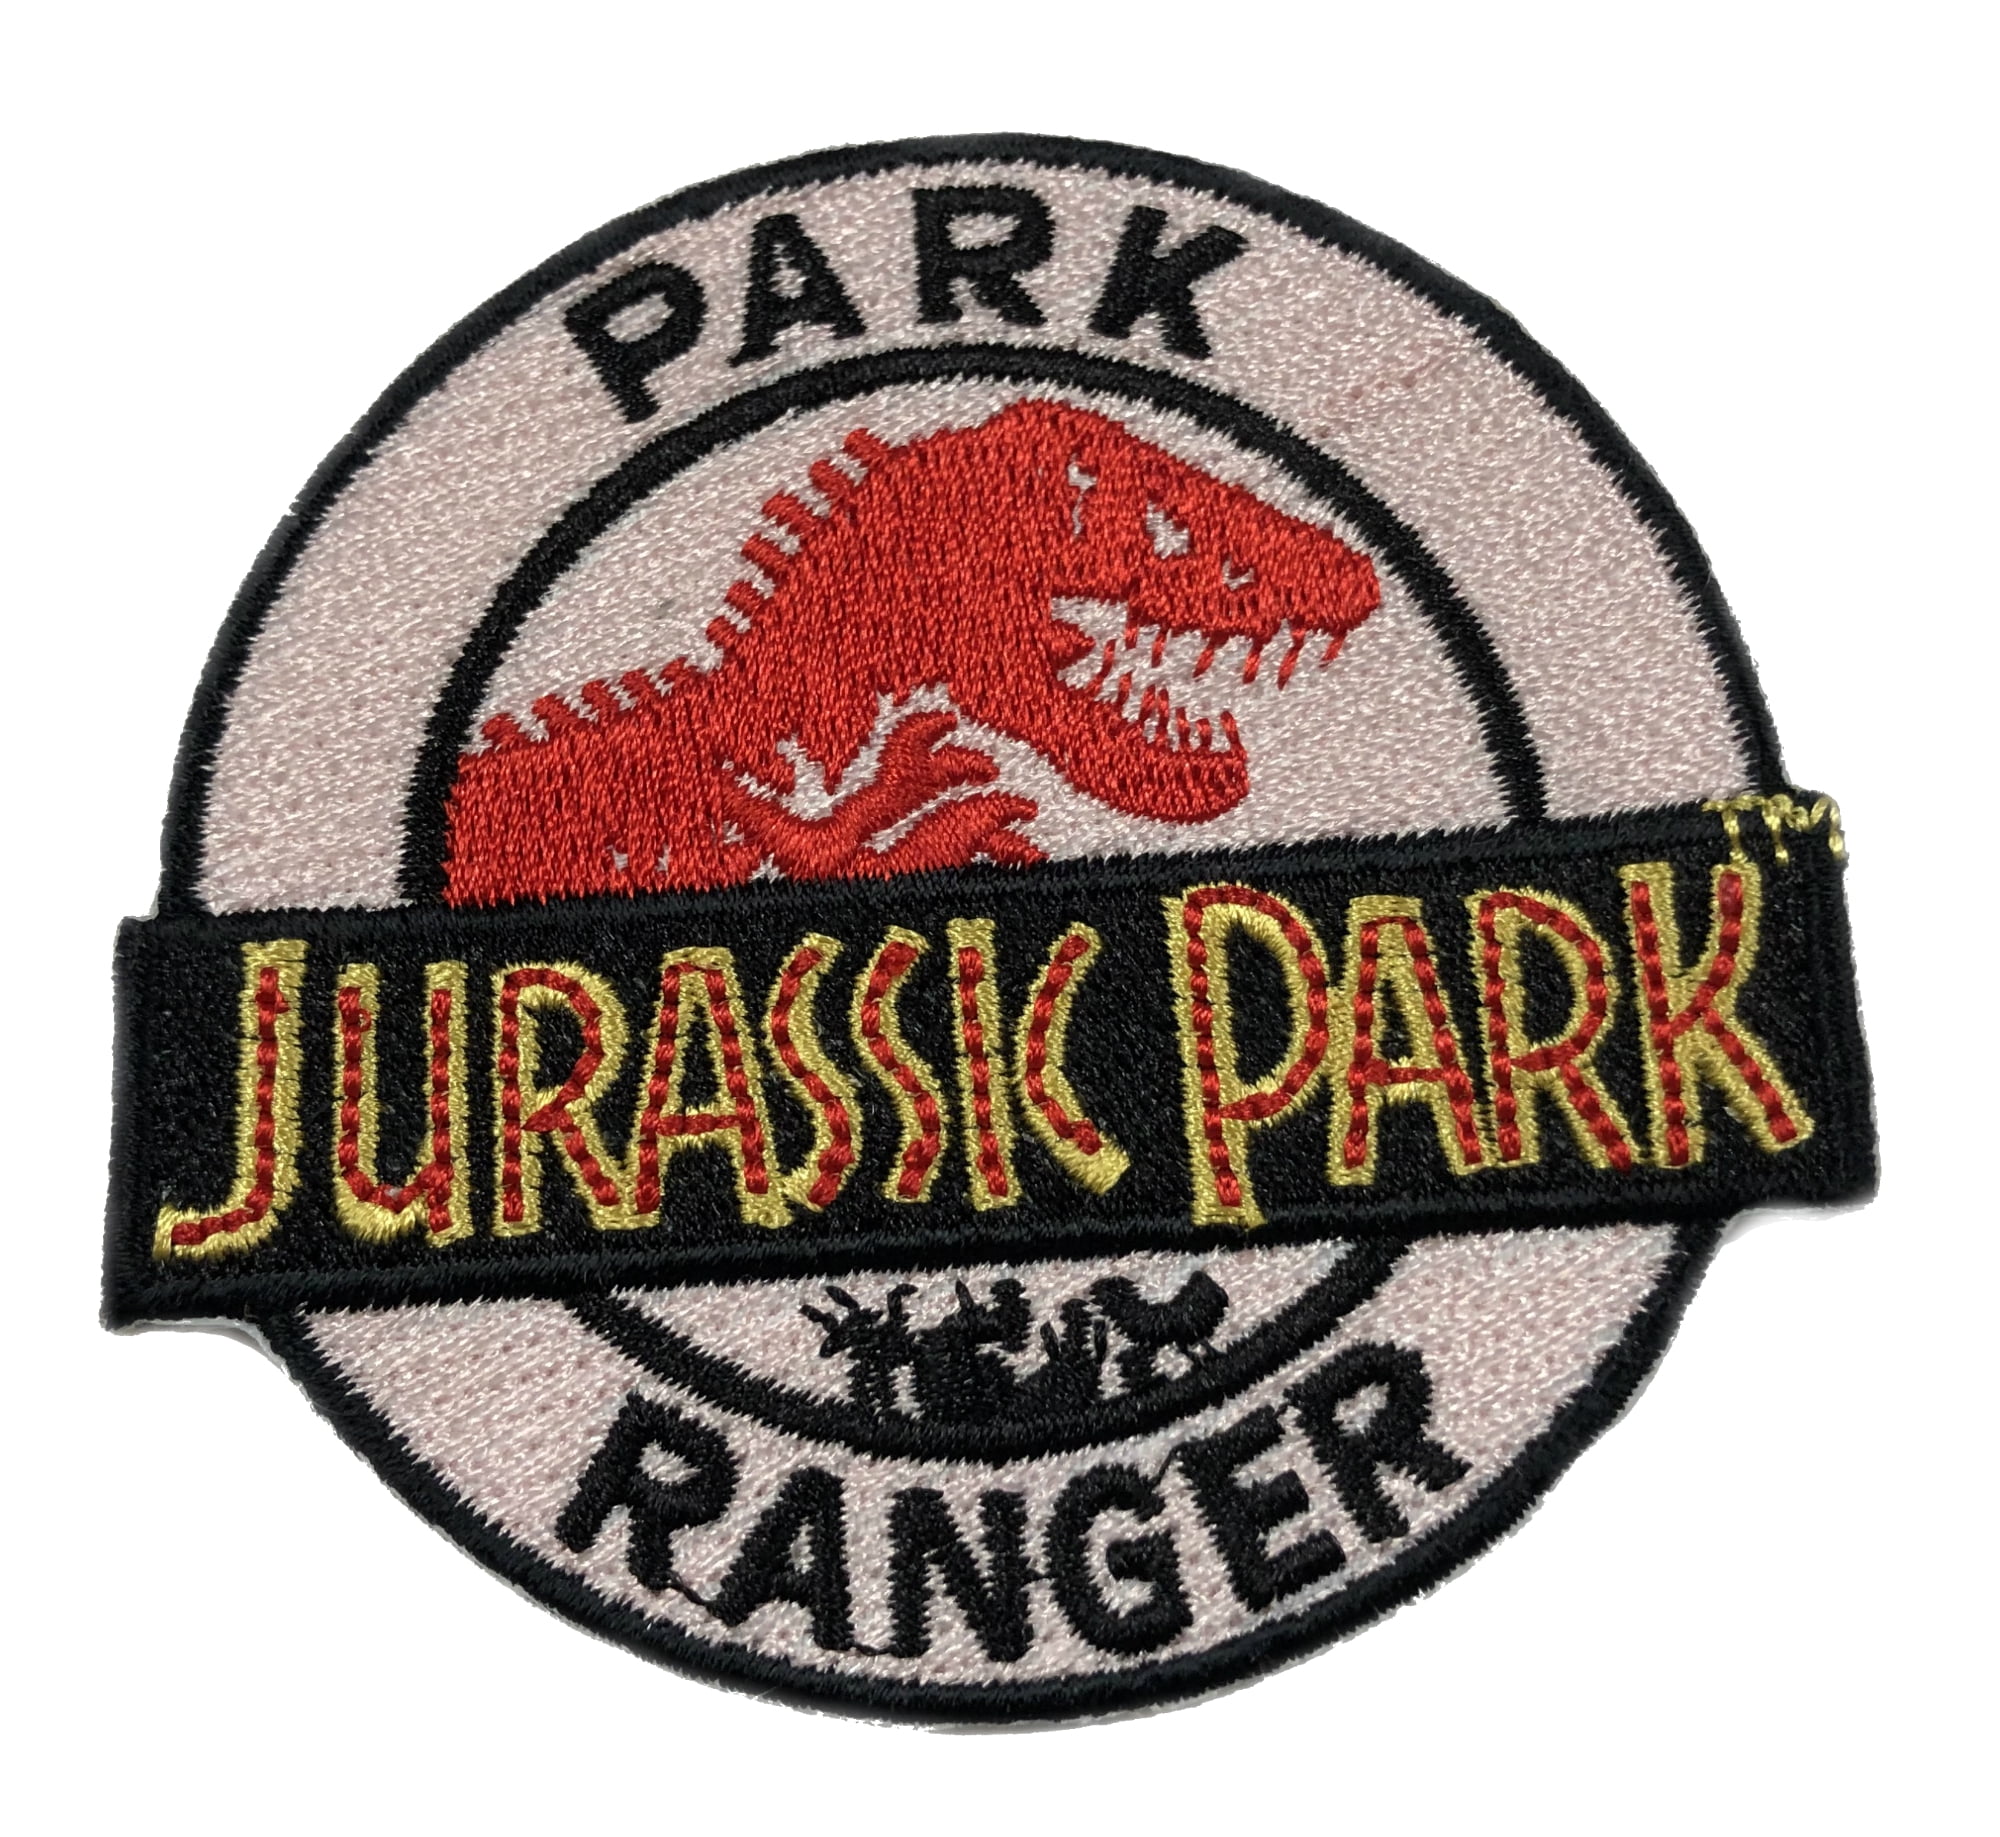 Jurassic Park Red Logo Patch 4 inches wide 